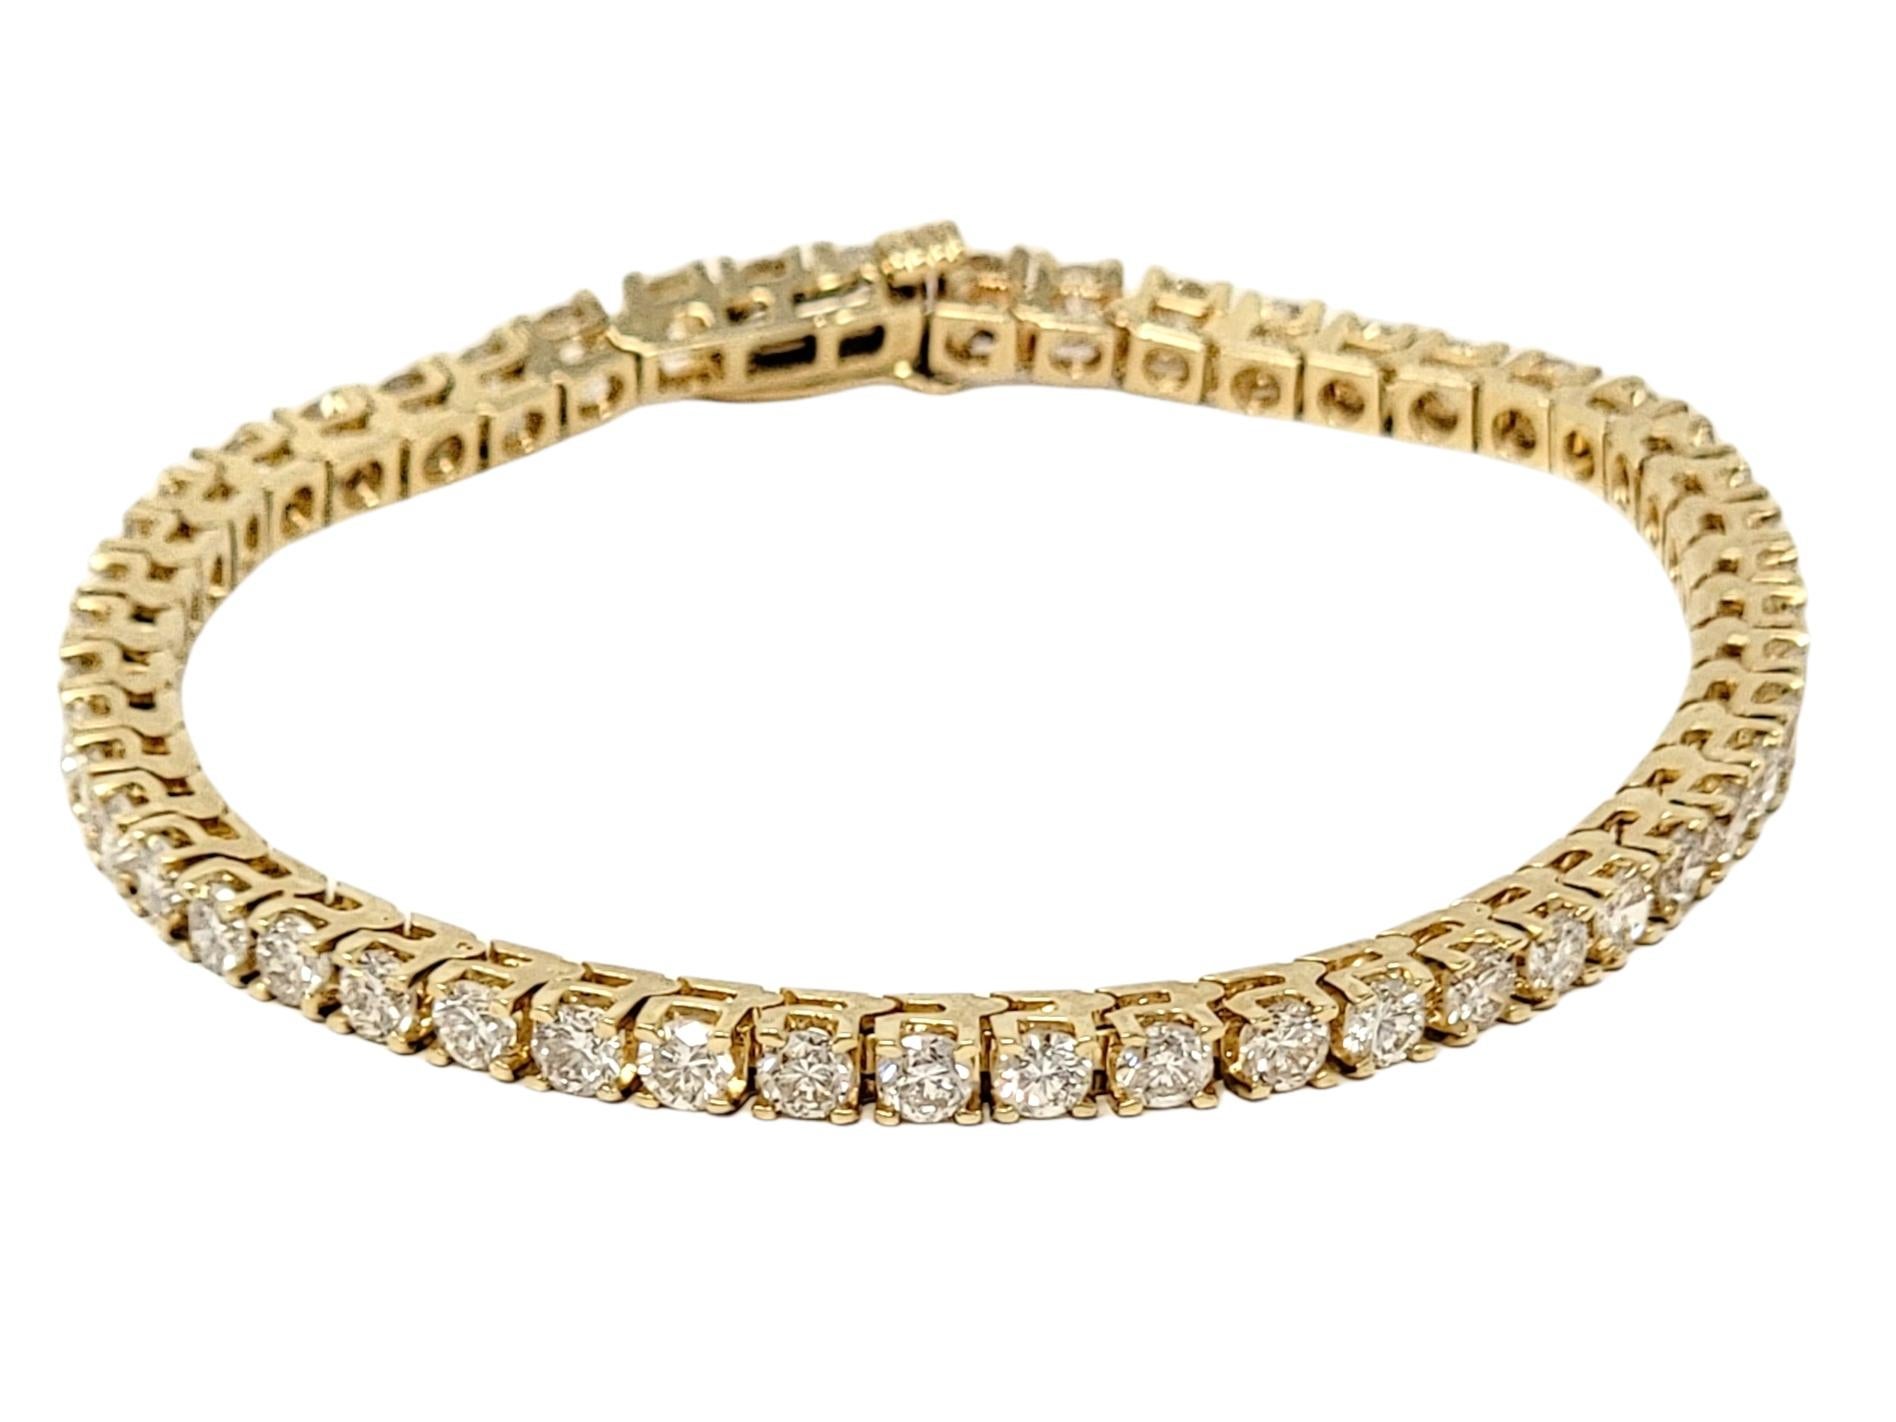 Absolutely stunning diamond tennis bracelet that will stand the test of time. The elegant yellow gold setting paired with the timeless round diamonds makes this piece a true classic that will never go out of style.   
The 48 glittering prong set